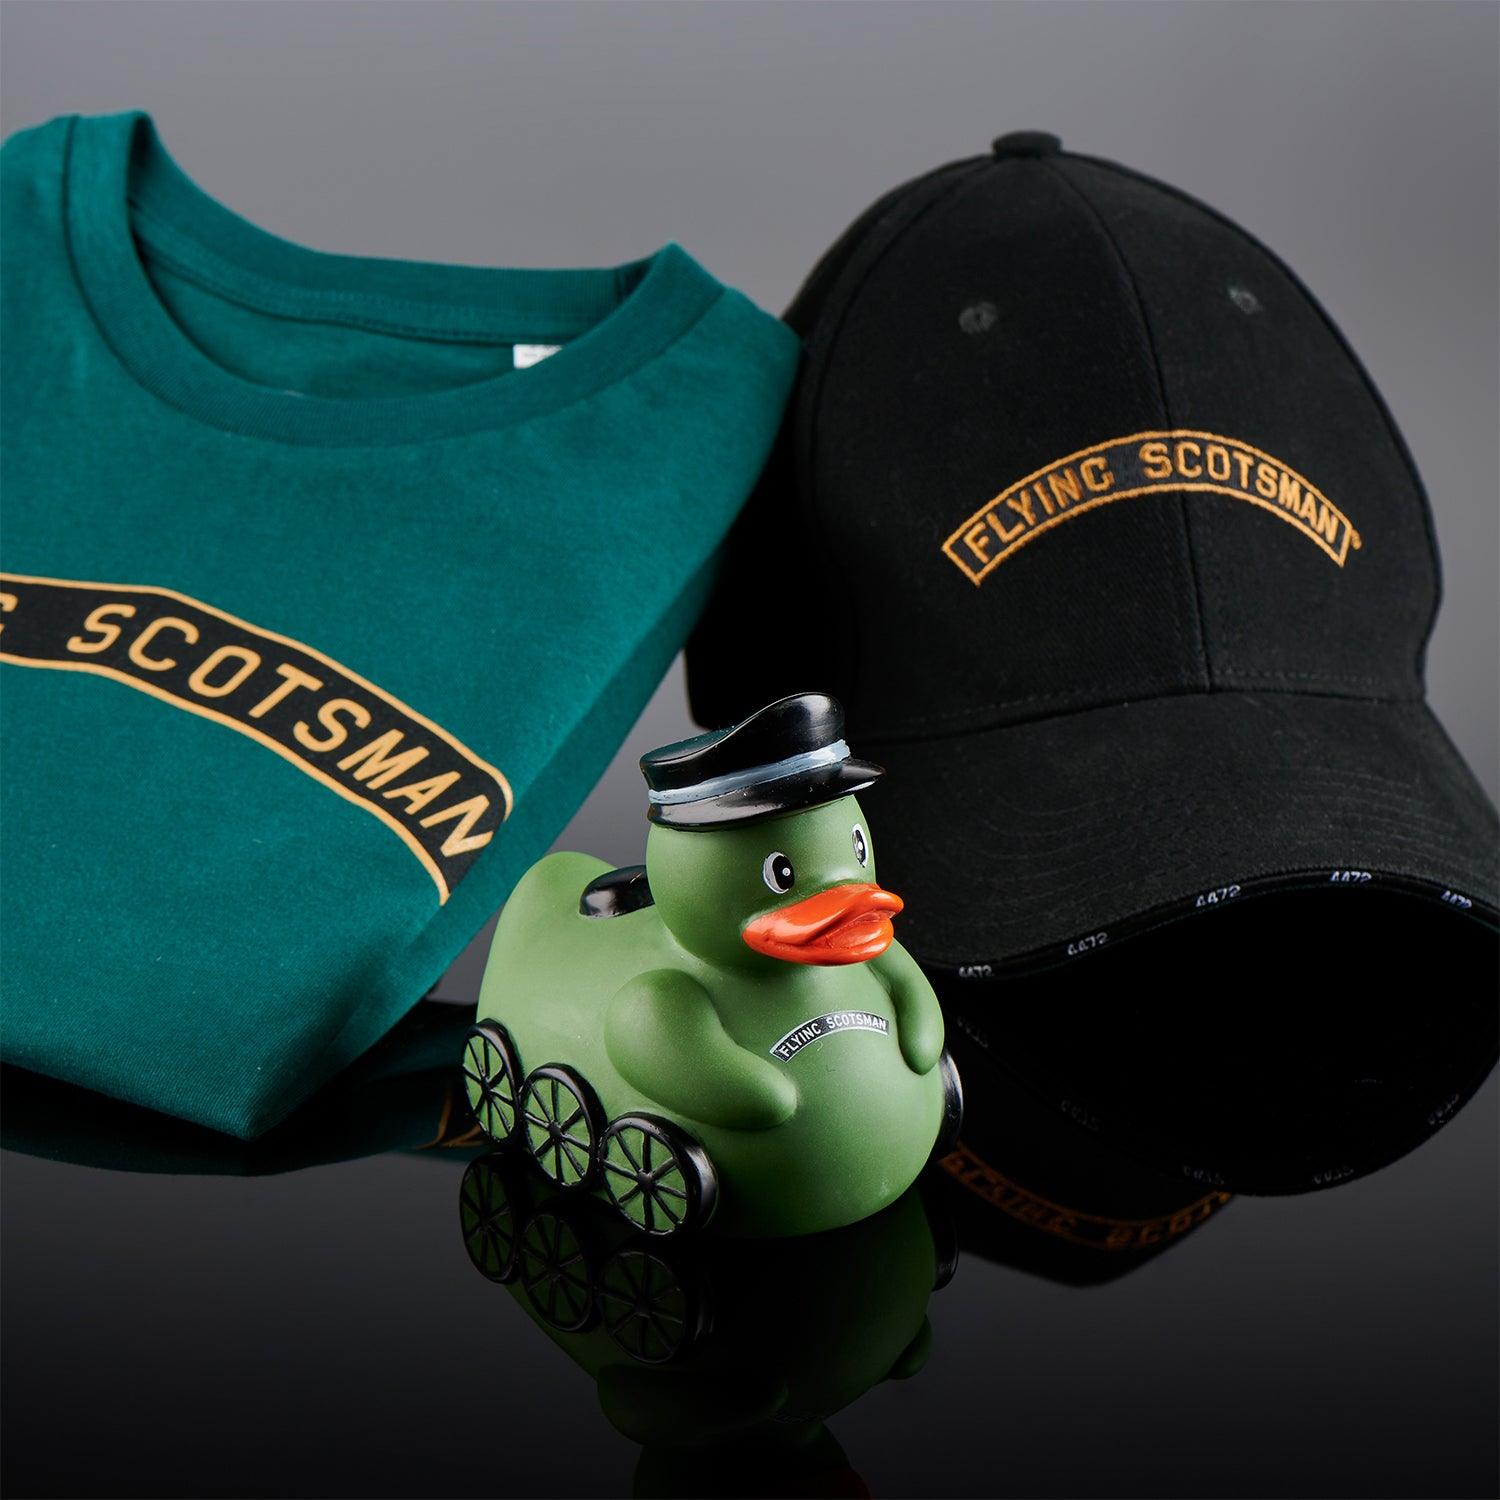 National Railway Museum Flying Scotsman Nameplate T-Shirt, cap and rubber duck - Science Museum Shop